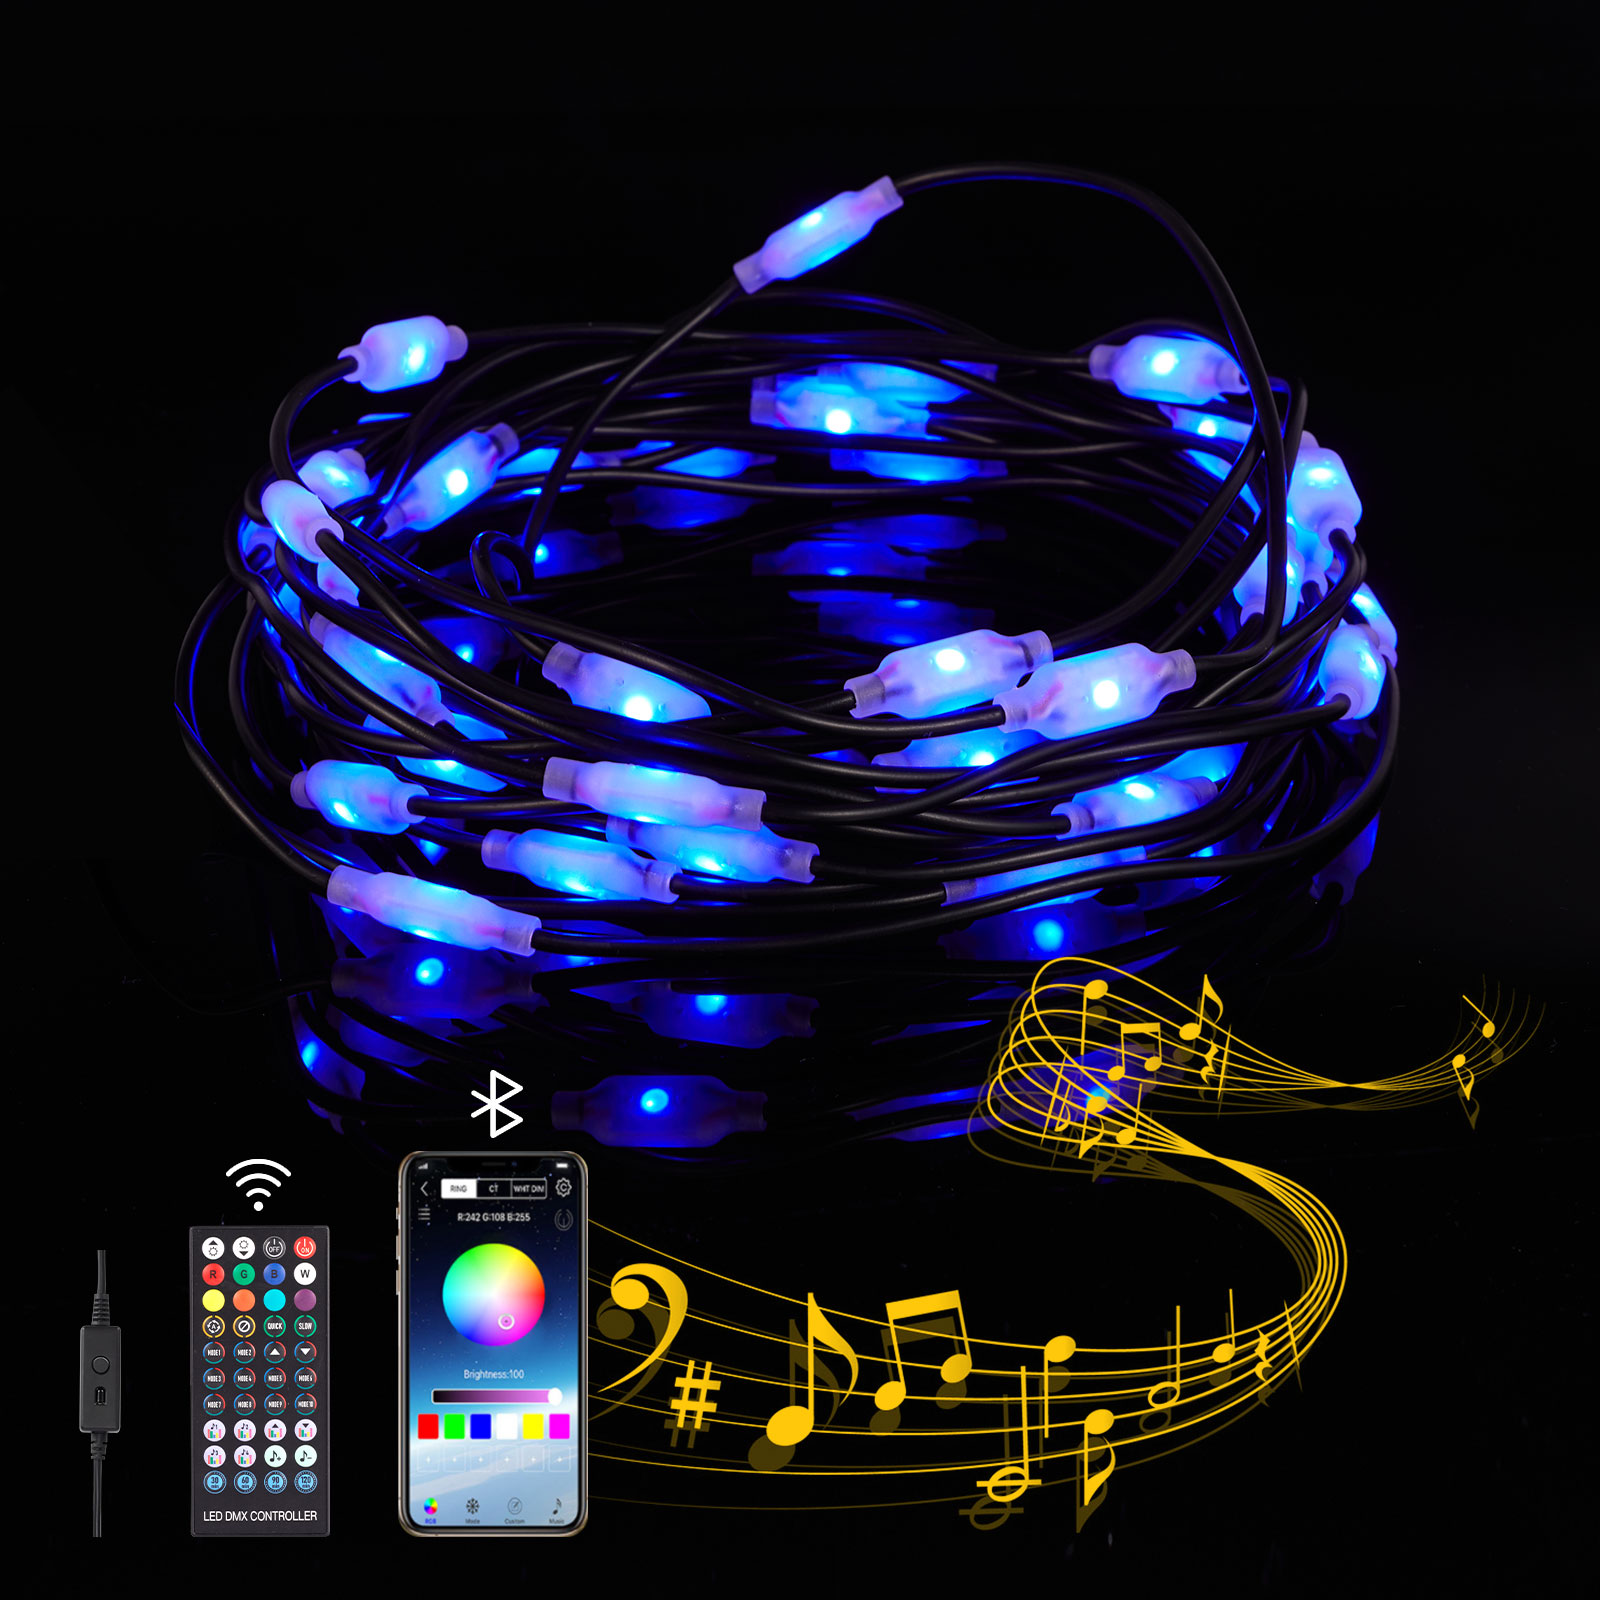 Outdoor String Lights, RGB 39.4ft LED Camping Lights,Multi-Color 40 LED Beads Works with LED LAMP App& Remote Control, IP65, 16 Colors Changing Manufacturers, Outdoor String Lights, RGB 39.4ft LED Camping Lights,Multi-Color 40 LED Beads Works with LED LAMP App& Remote Control, IP65, 16 Colors Changing Factory, Supply Outdoor String Lights, RGB 39.4ft LED Camping Lights,Multi-Color 40 LED Beads Works with LED LAMP App& Remote Control, IP65, 16 Colors Changing